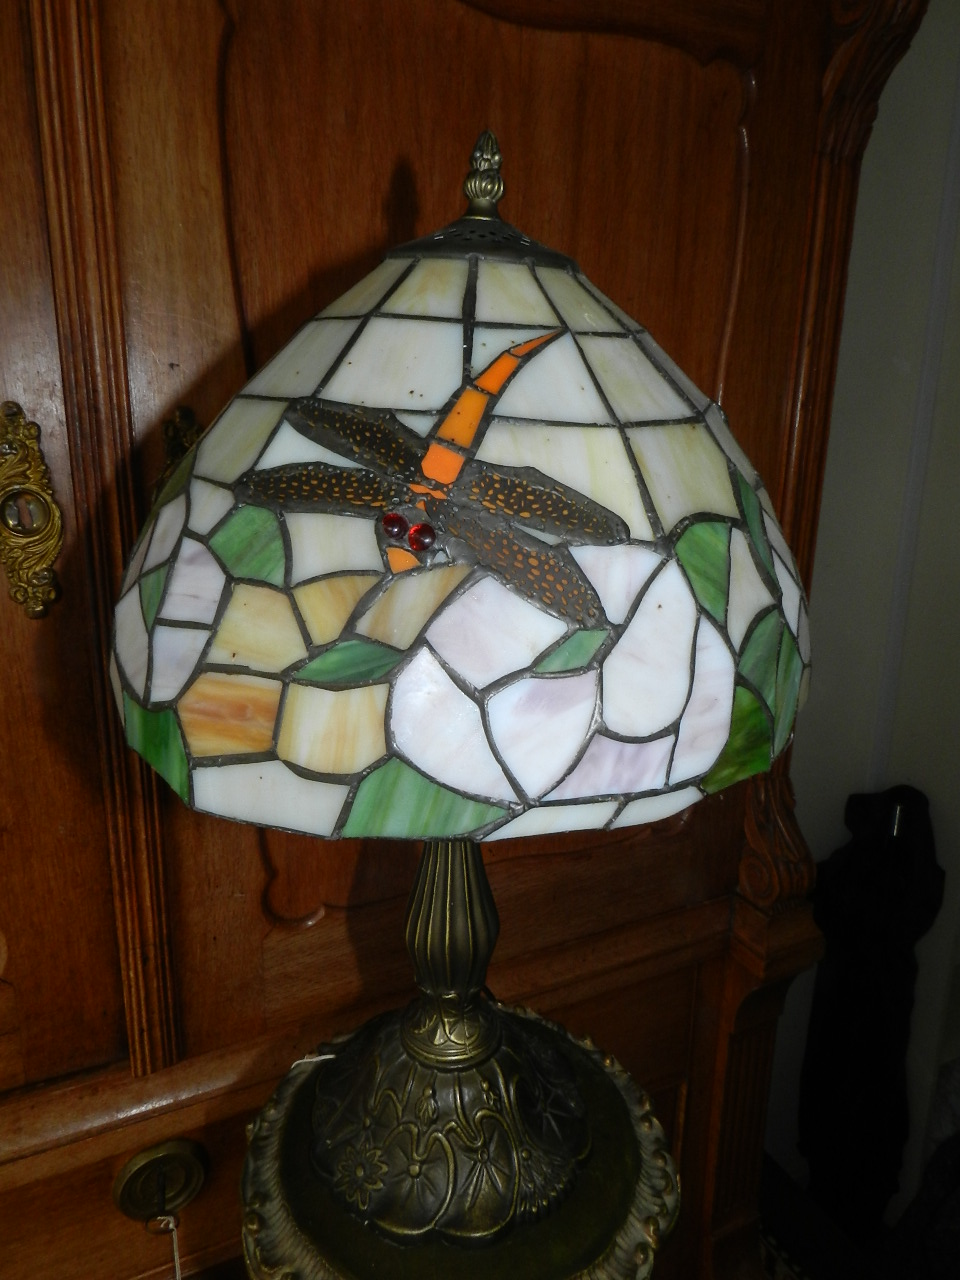 A Tiffany style table lamp base, having leaded glass shade decorated with dragonflies.